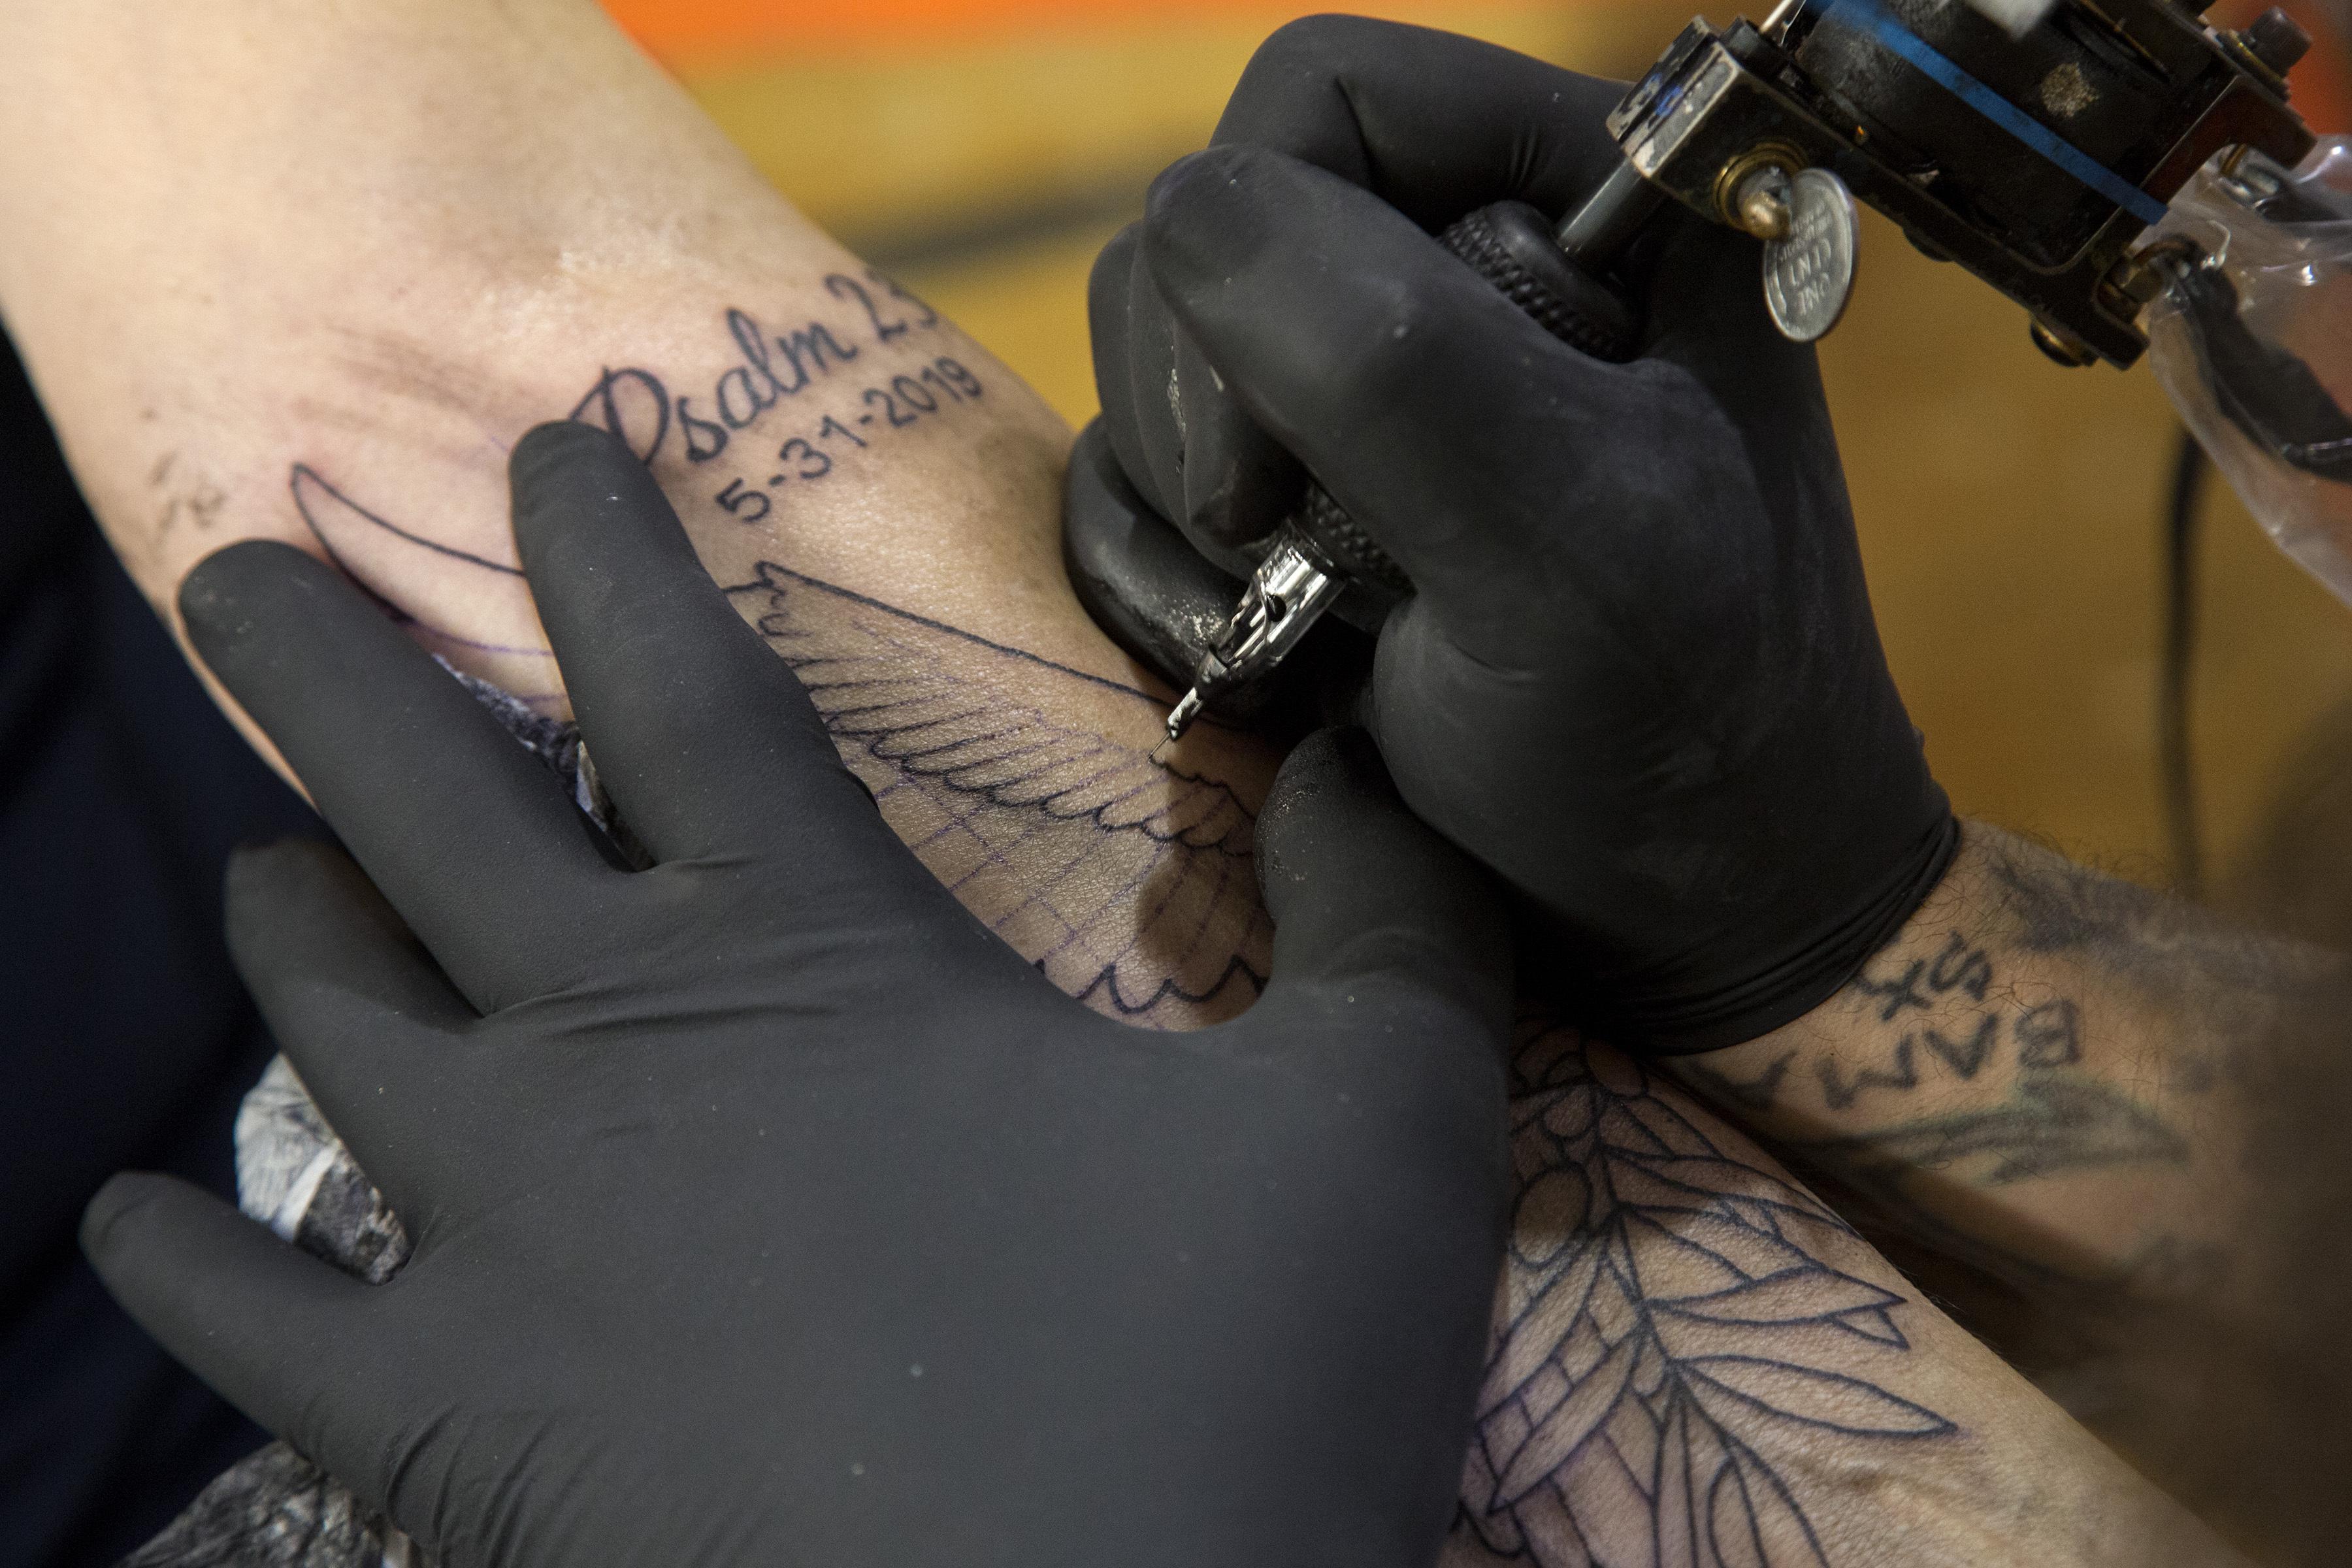 Tattoo ink is under-regulated, scientists say - ABC News